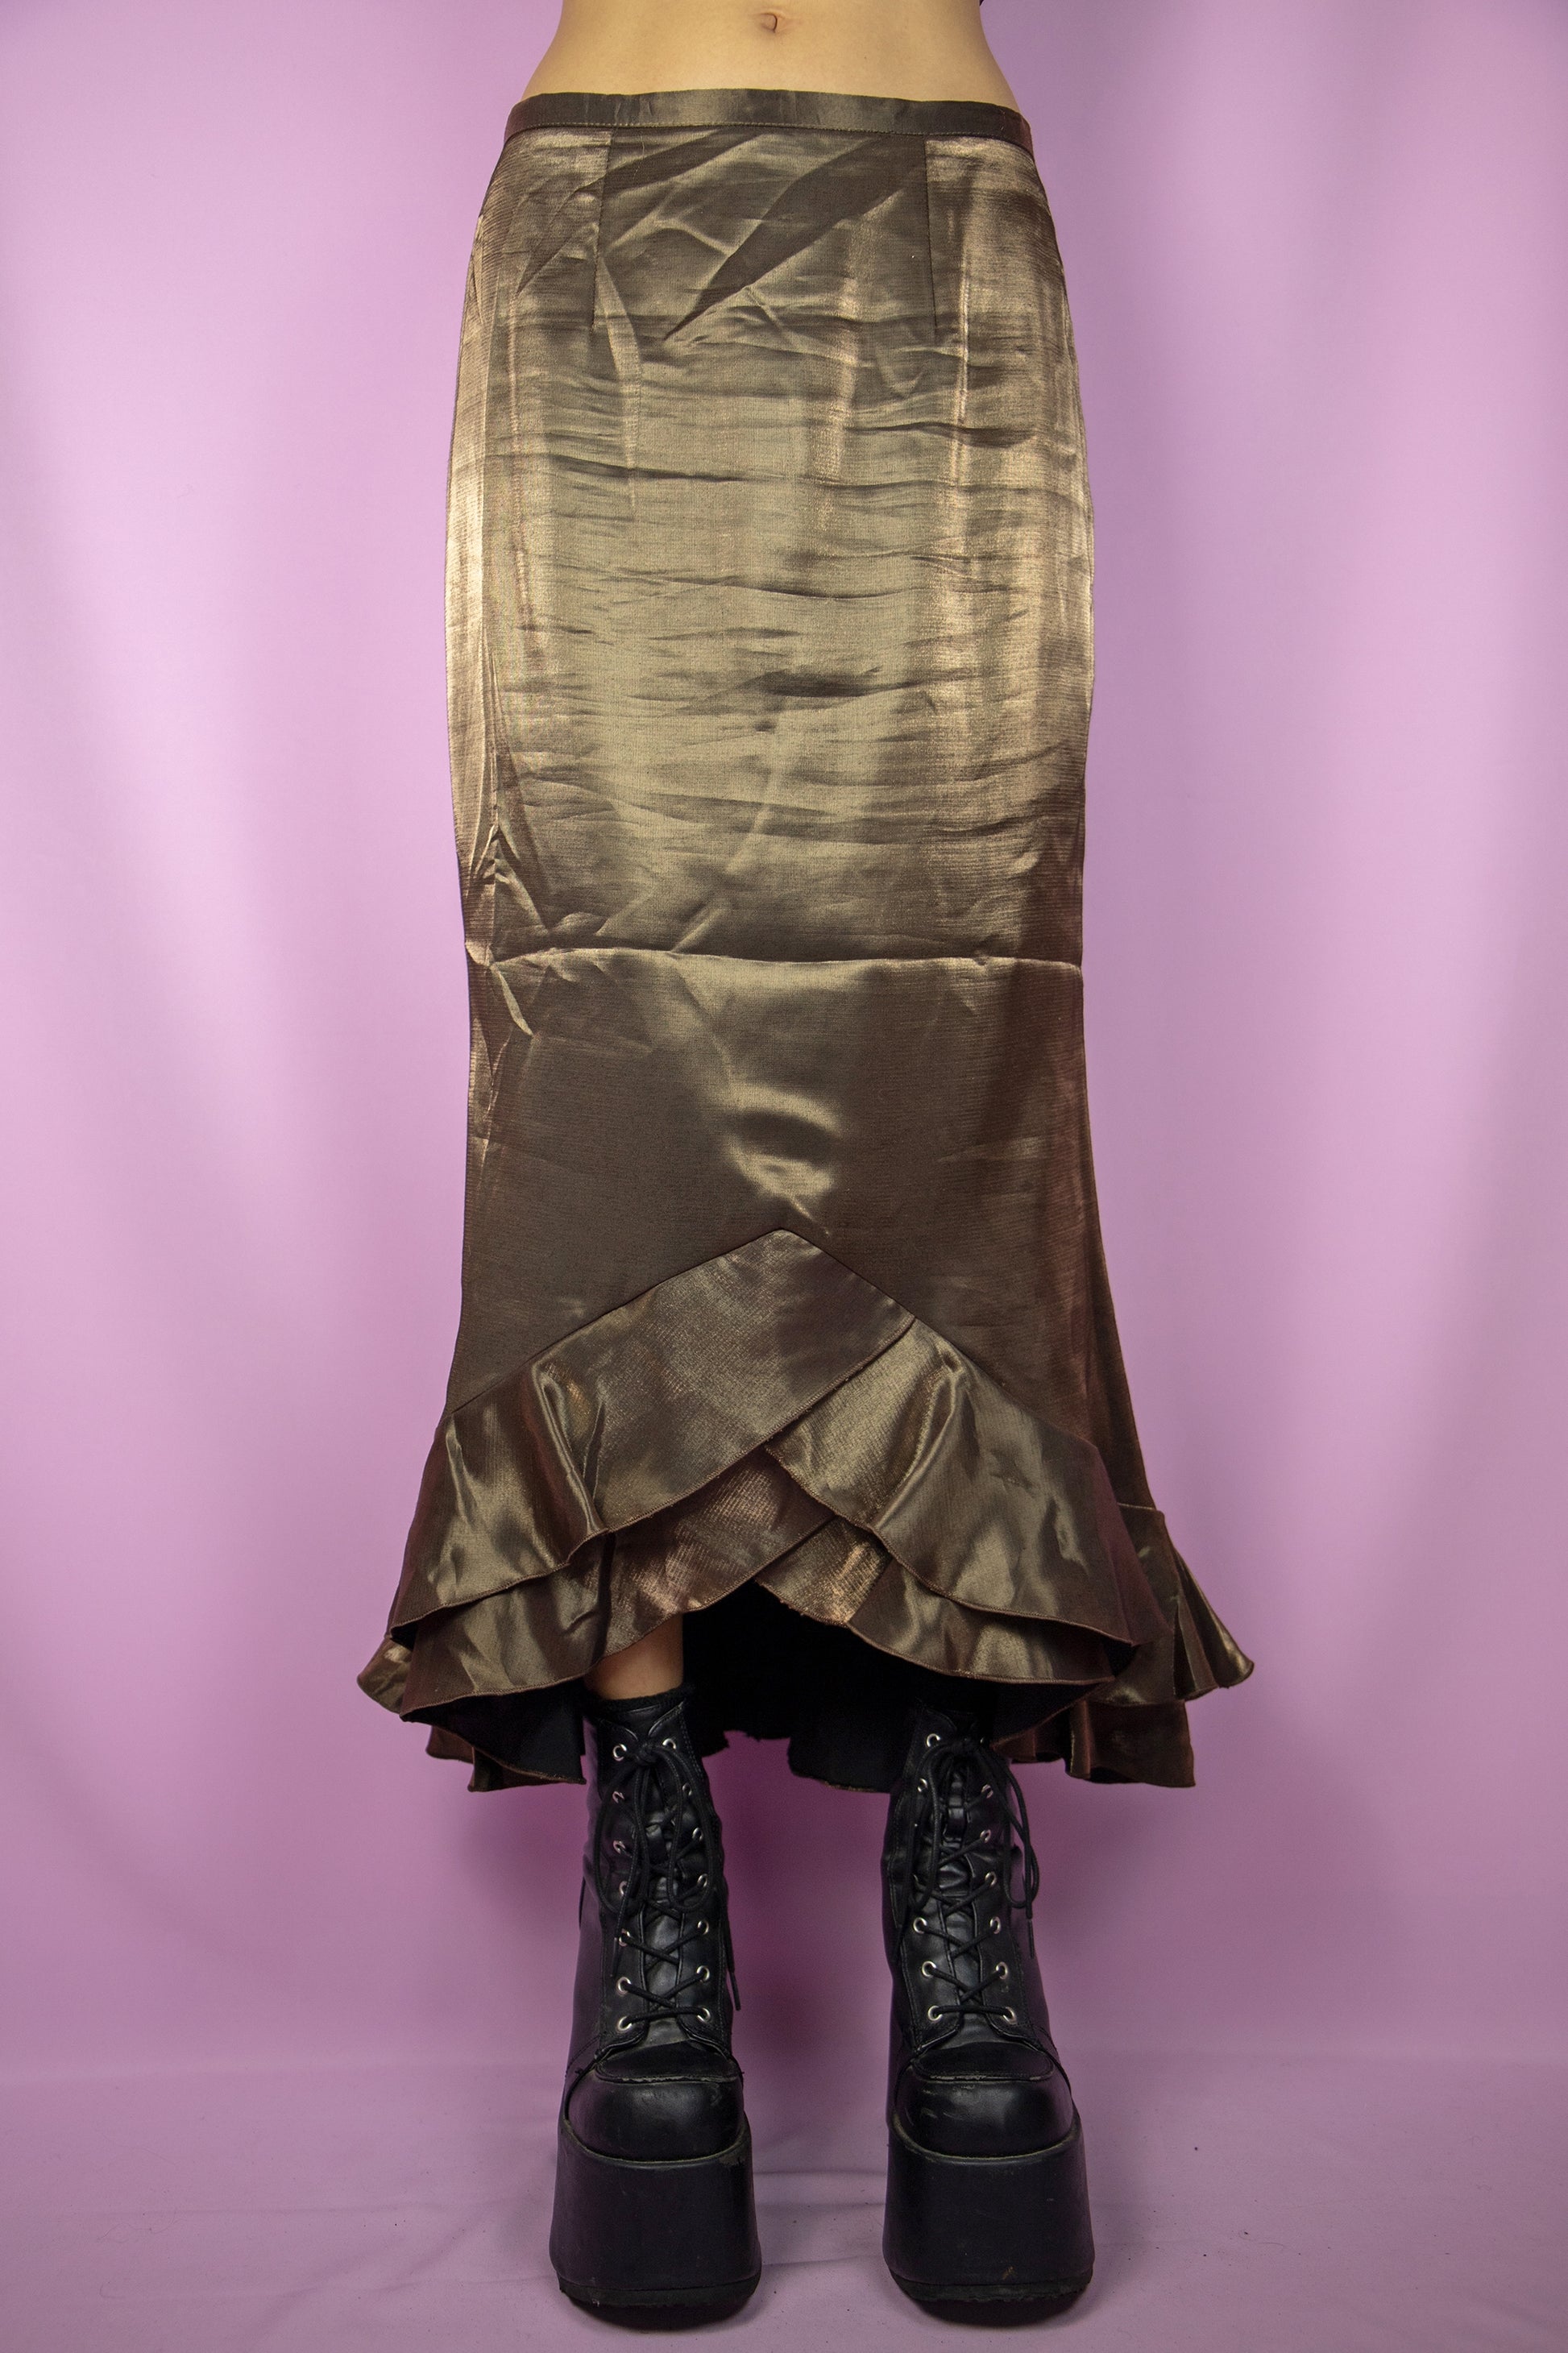 The Vintage 90s Brown Mermaid Midi Skirt is a greenish-brown iridescent skirt with a tulip-style ruffled hem and a back zipper closure.</span> Romantic avant garde 1990s party night maxi skirt.